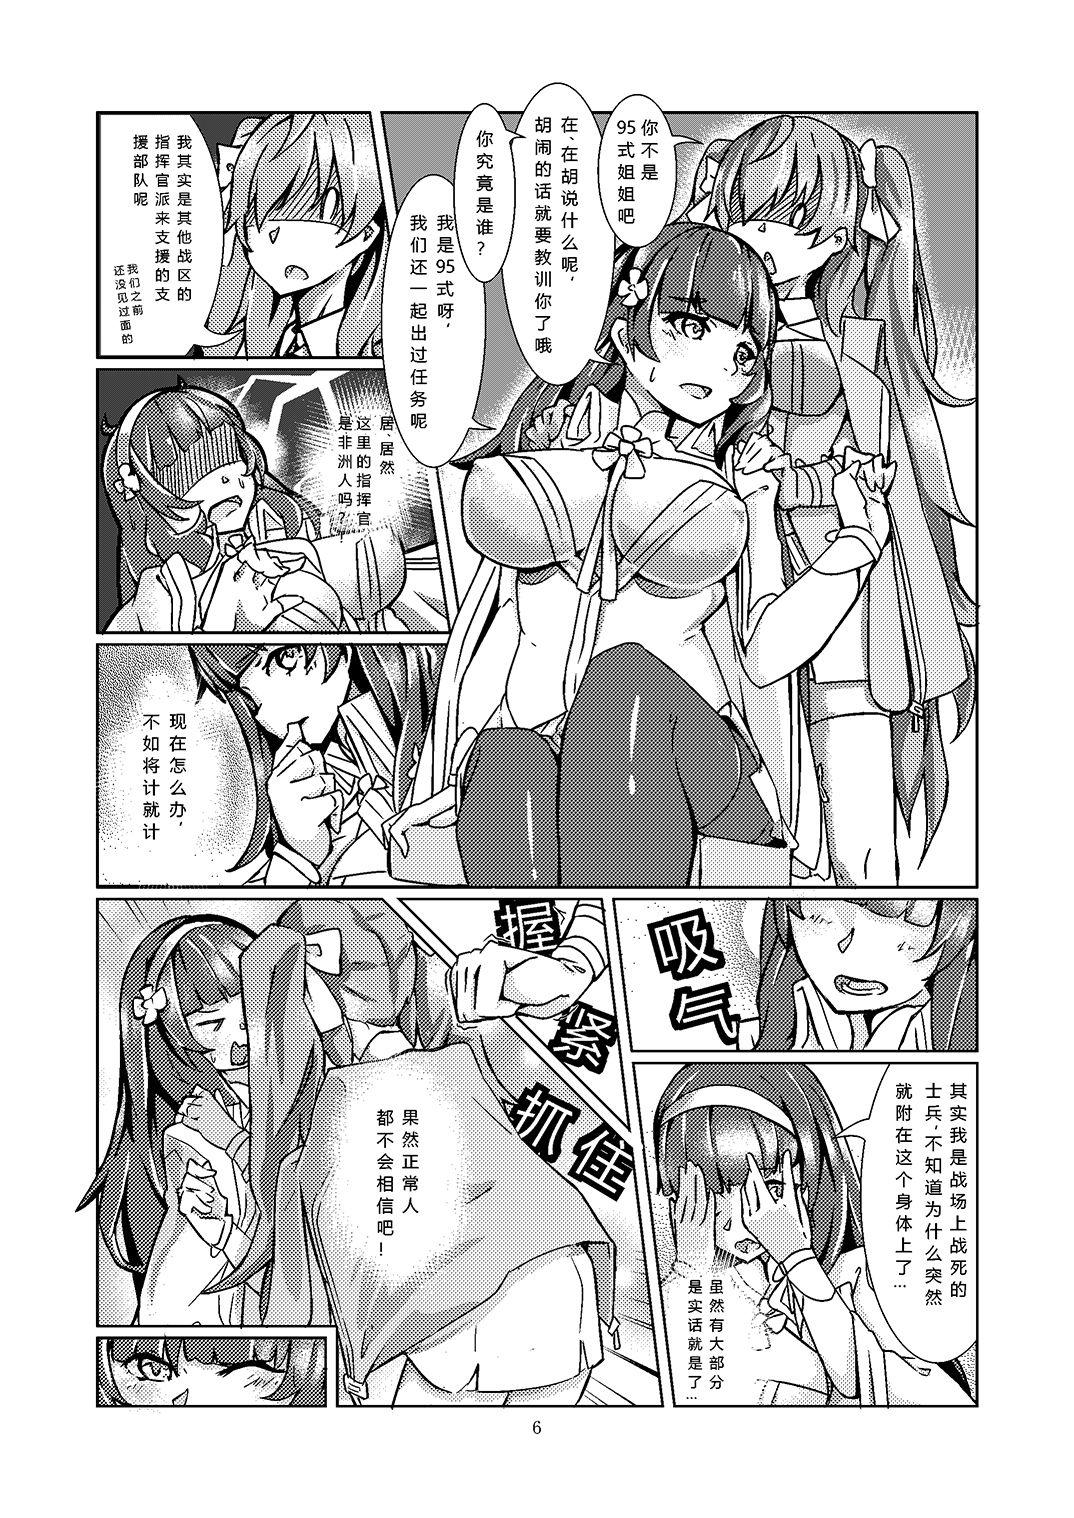 Free Hardcore 95 - Girls frontline Huge Tits - Page 8